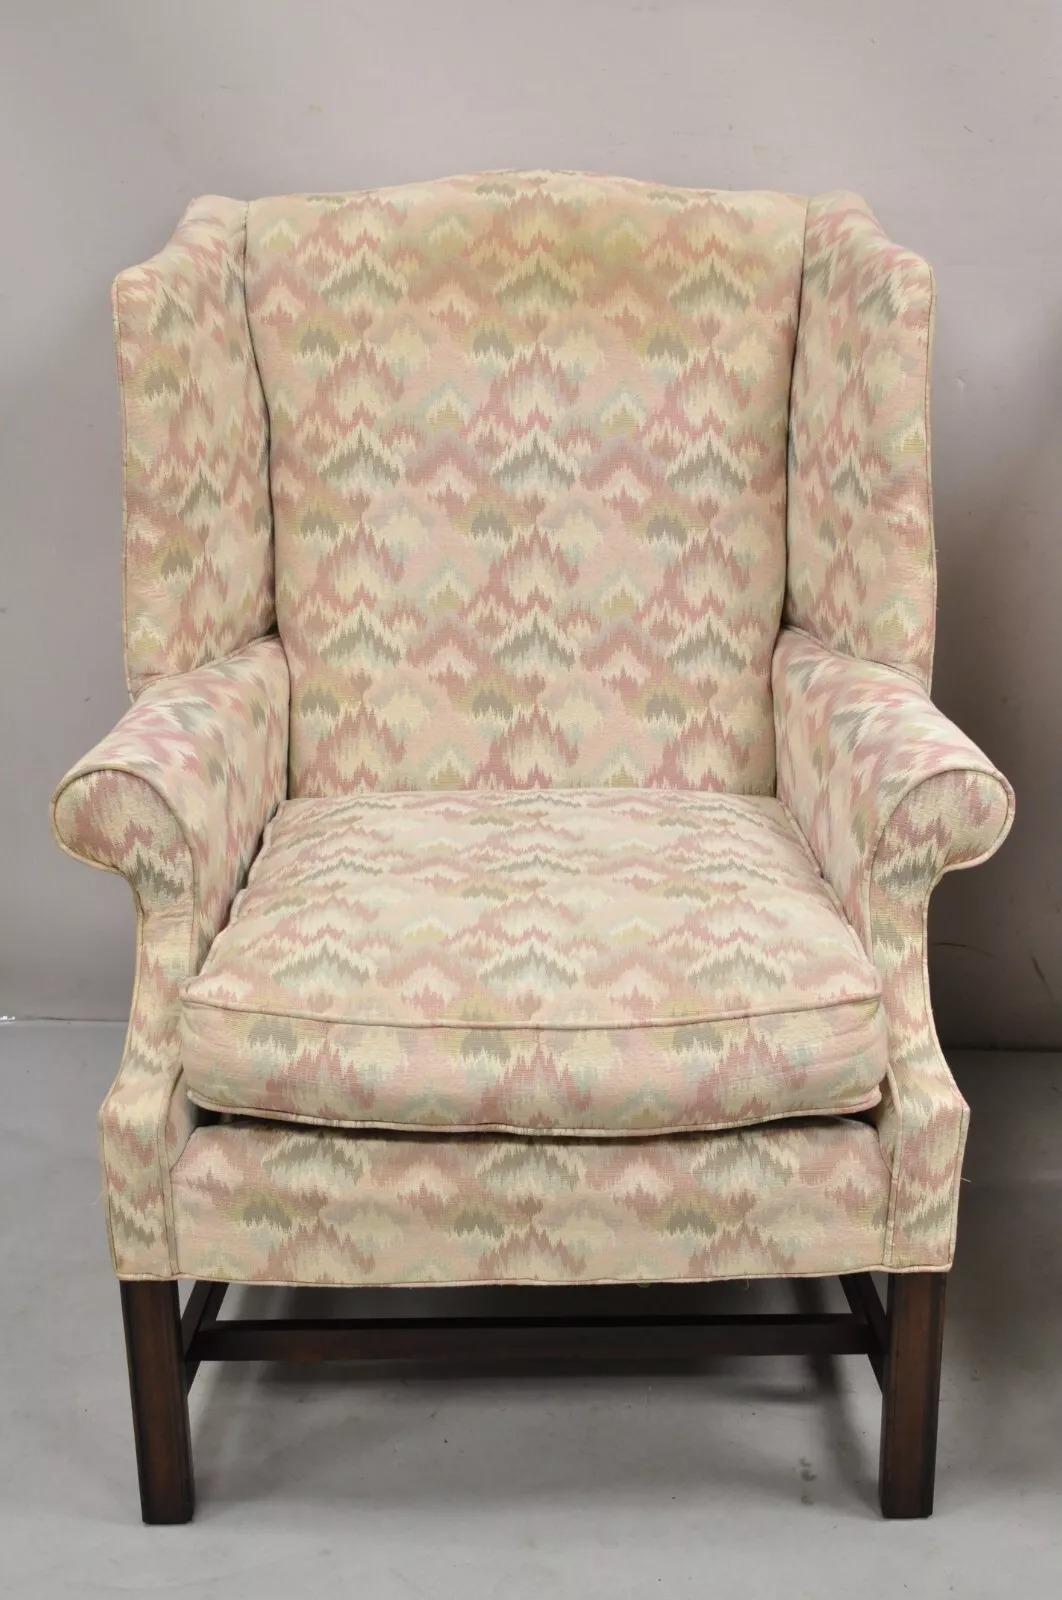 Frederick Edward Georgian Style Upholstered Wingback Lounge Arm Chairs - a Pair For Sale 2